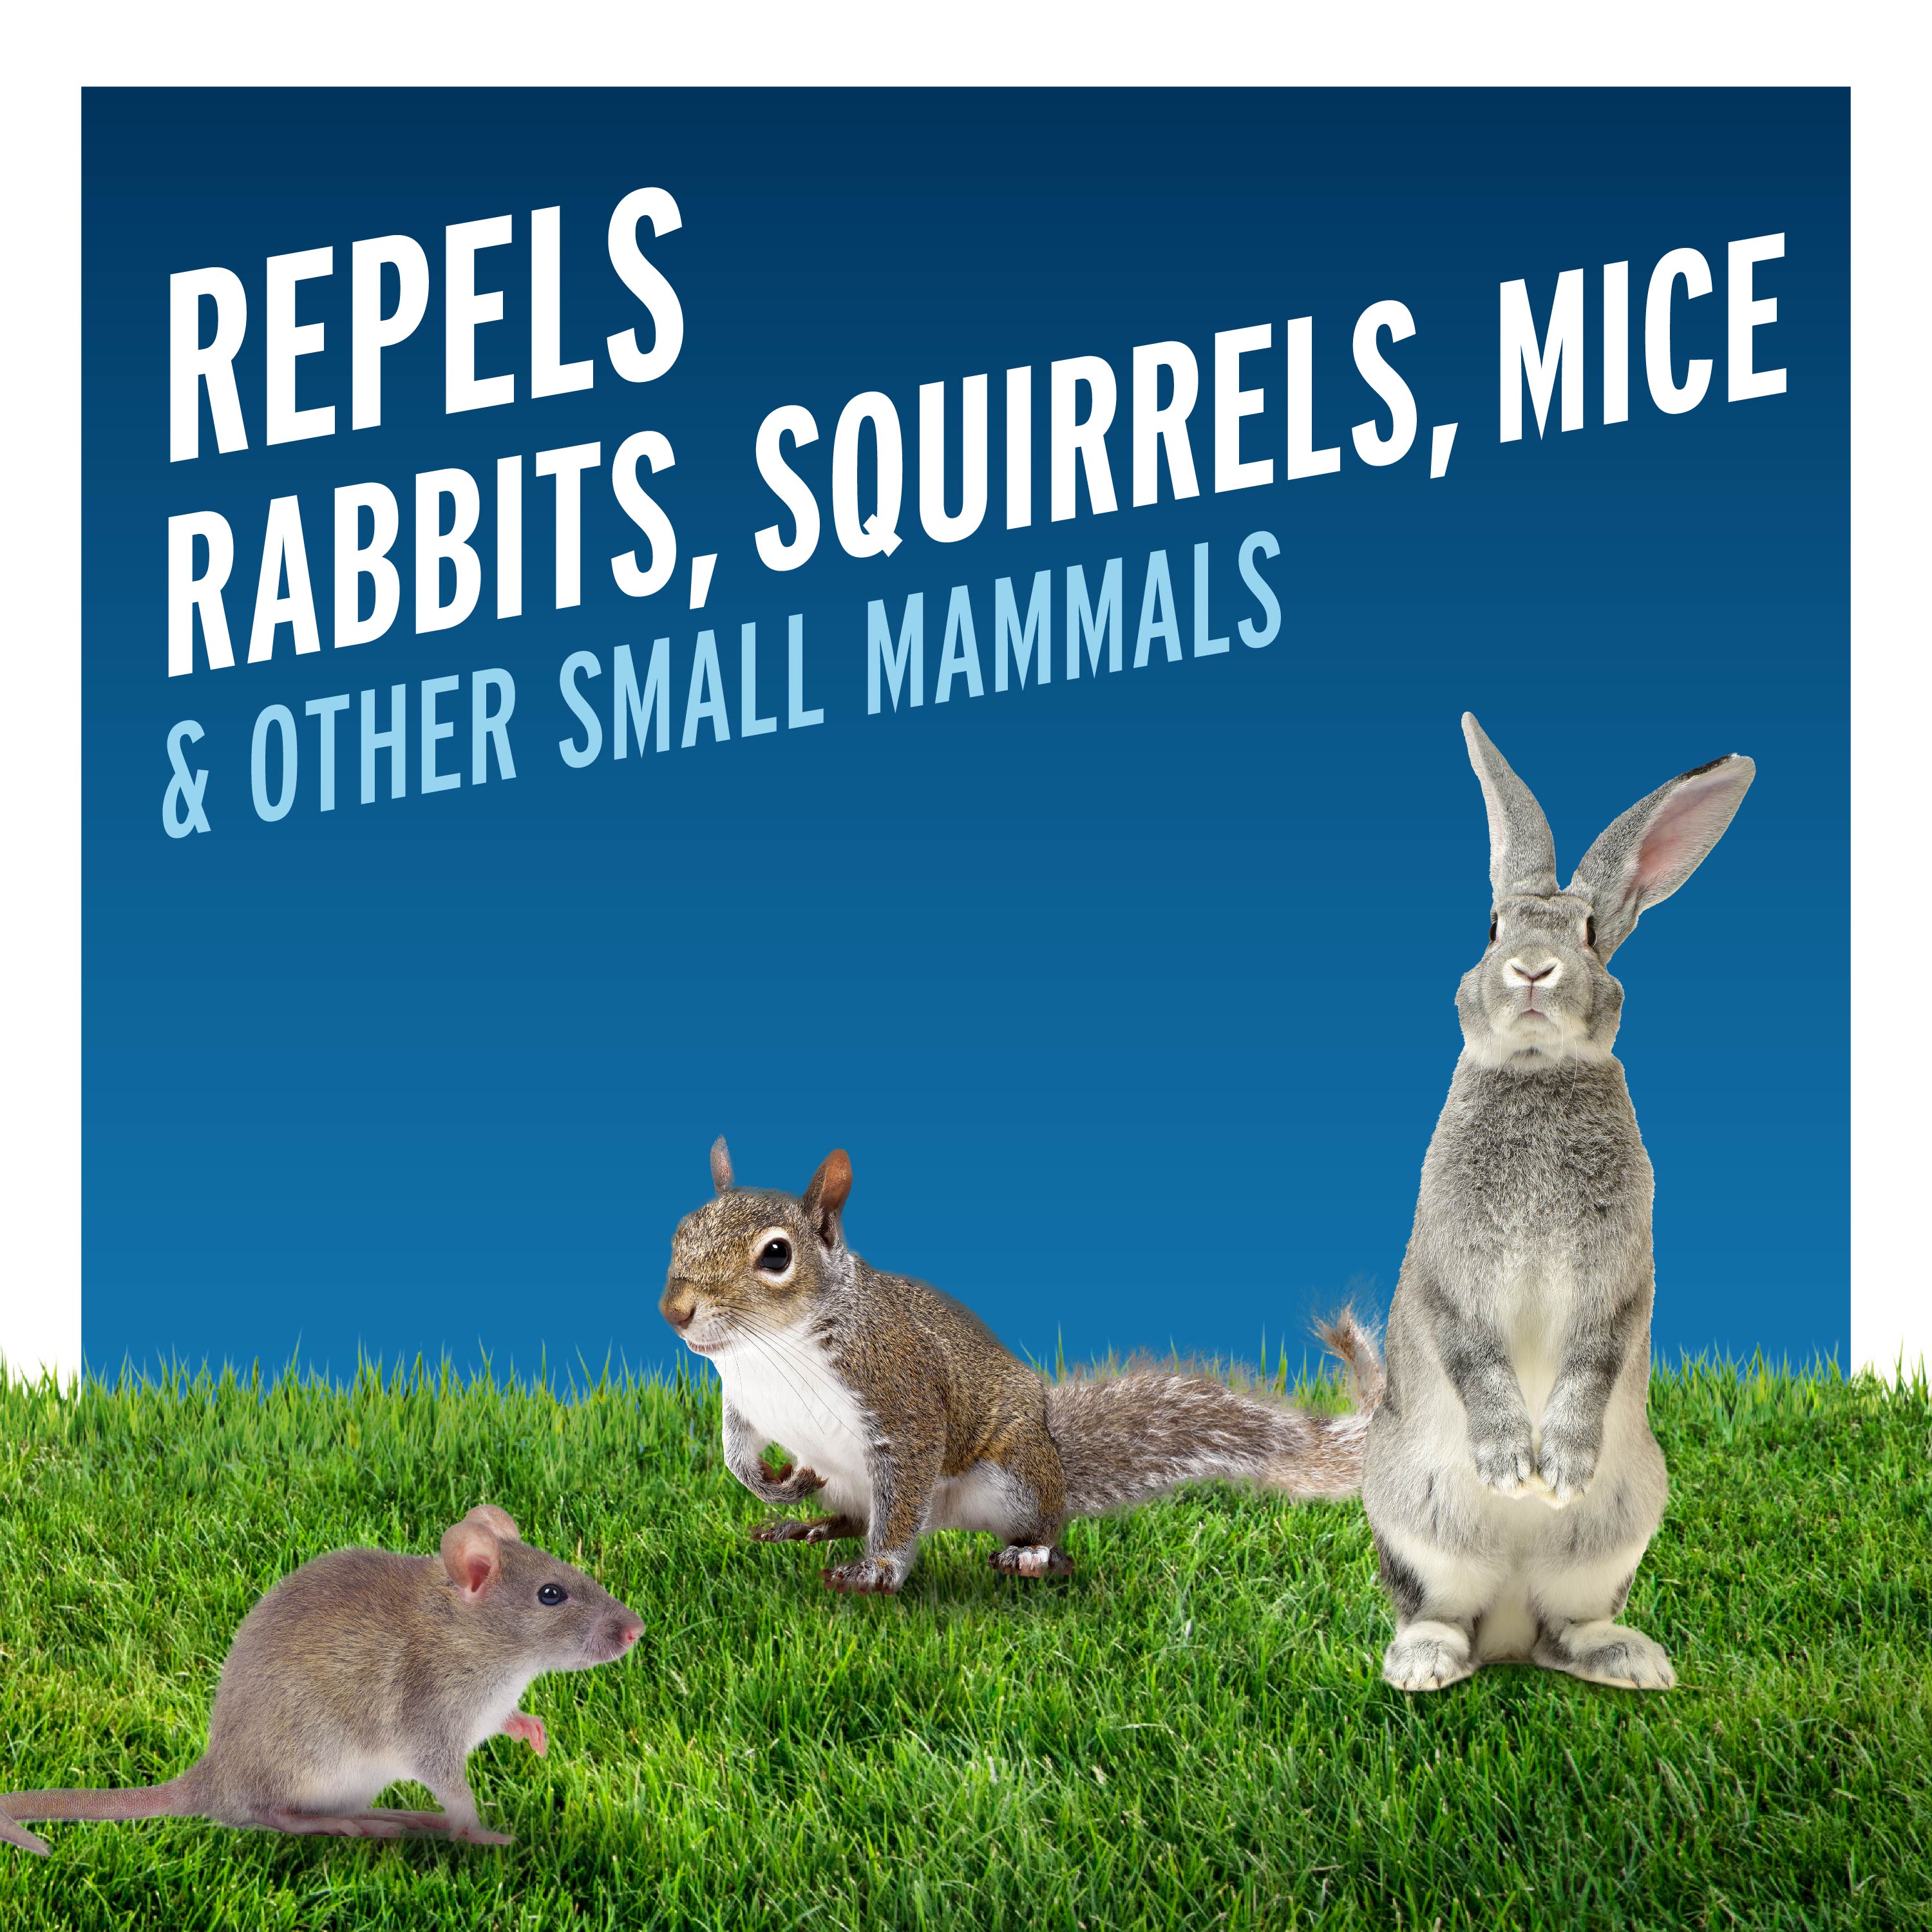 repels rabbits, squirrels, mice and other small mammals